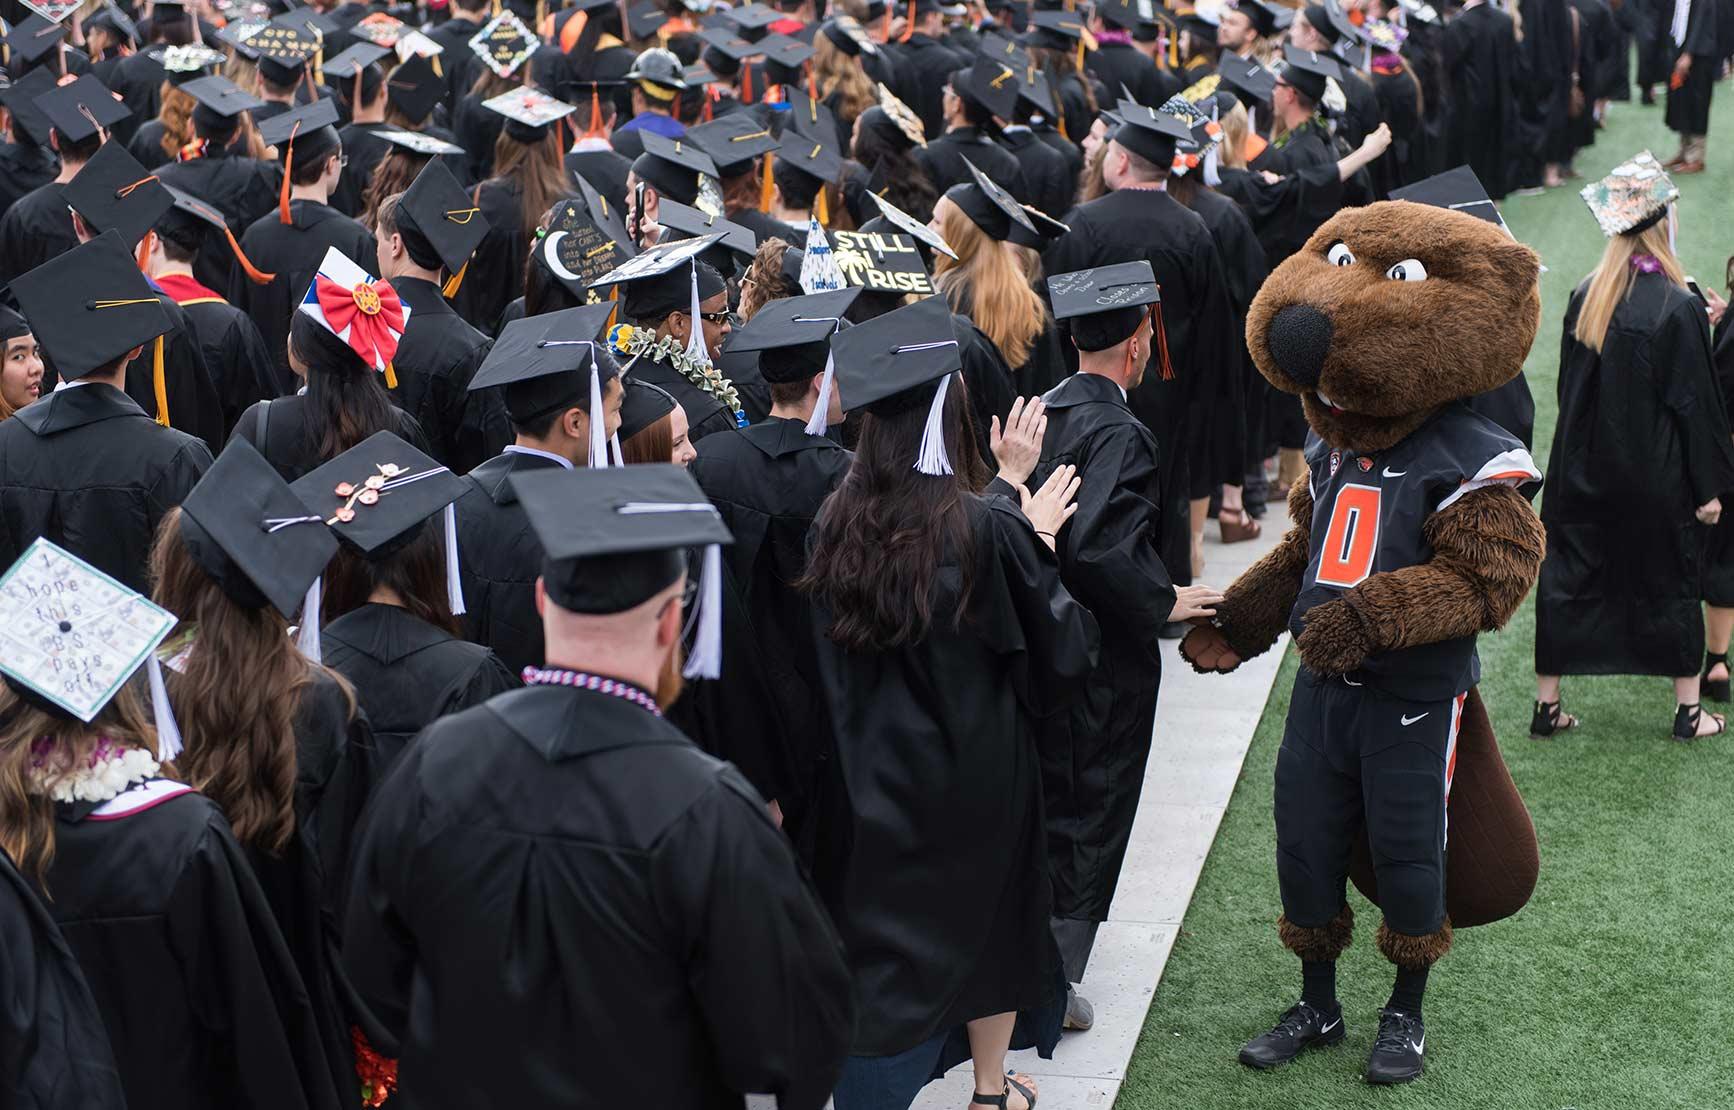 Benny hanging out with graduating students during commencement ceremony in Reser Stadium